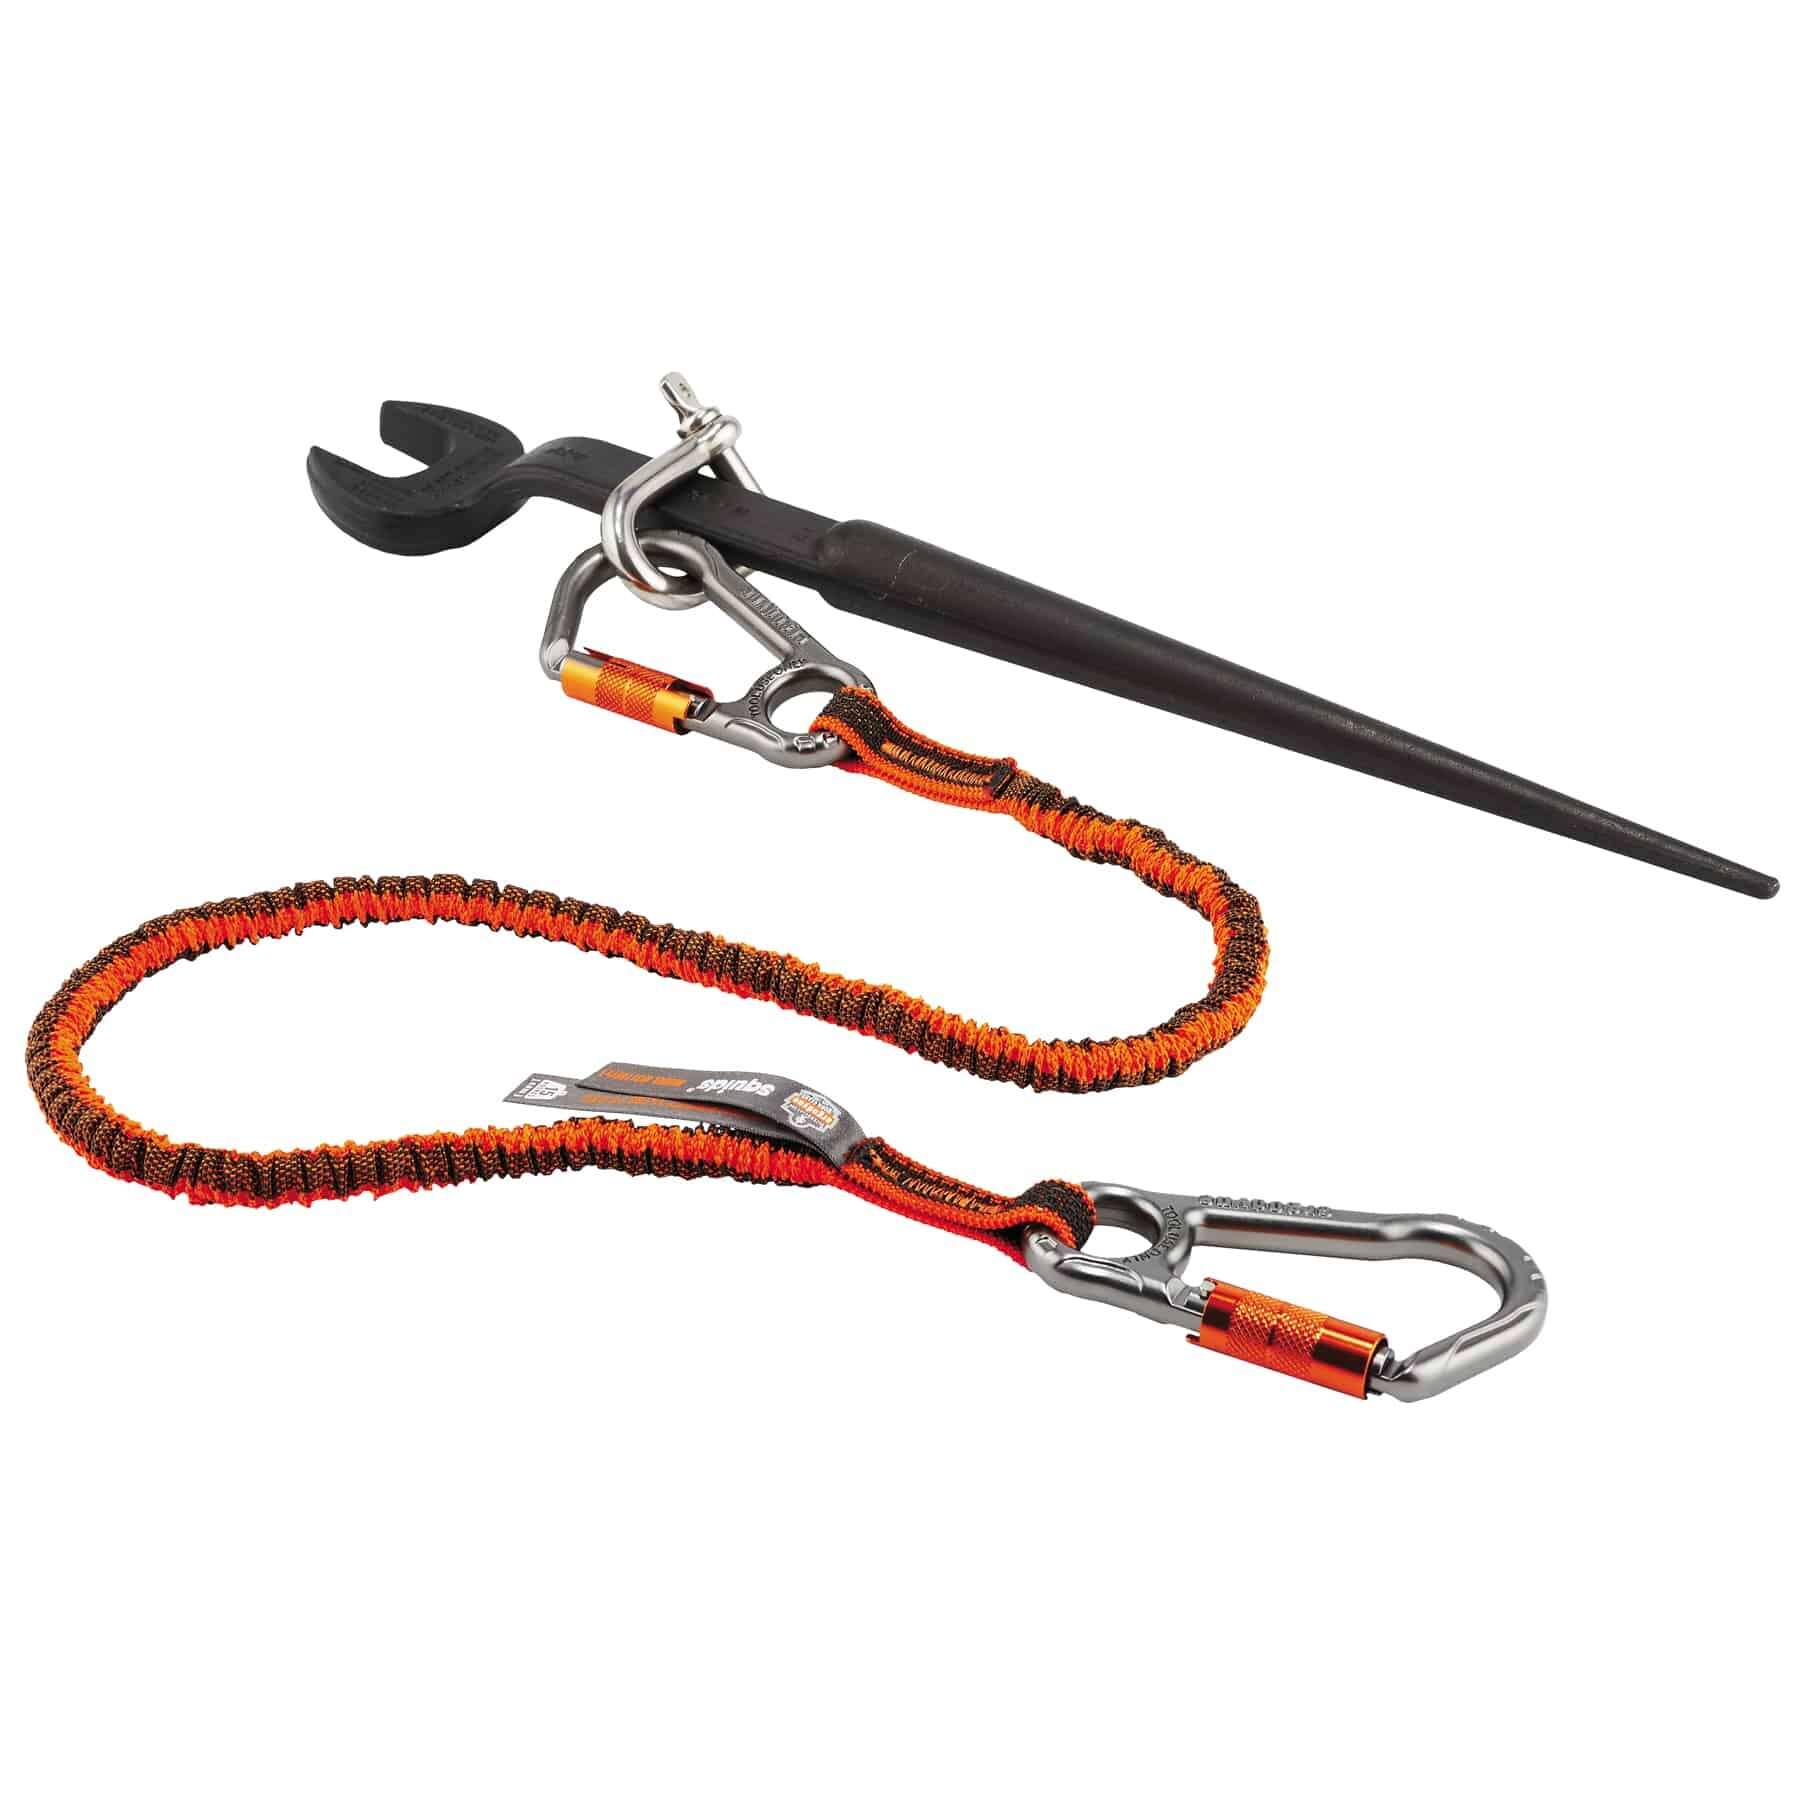 Includes Tool Lanyards and Attachments for Tape Measure and Power Tools Tool Tethering Kit for Carpenter Ergodyne Squids 3183